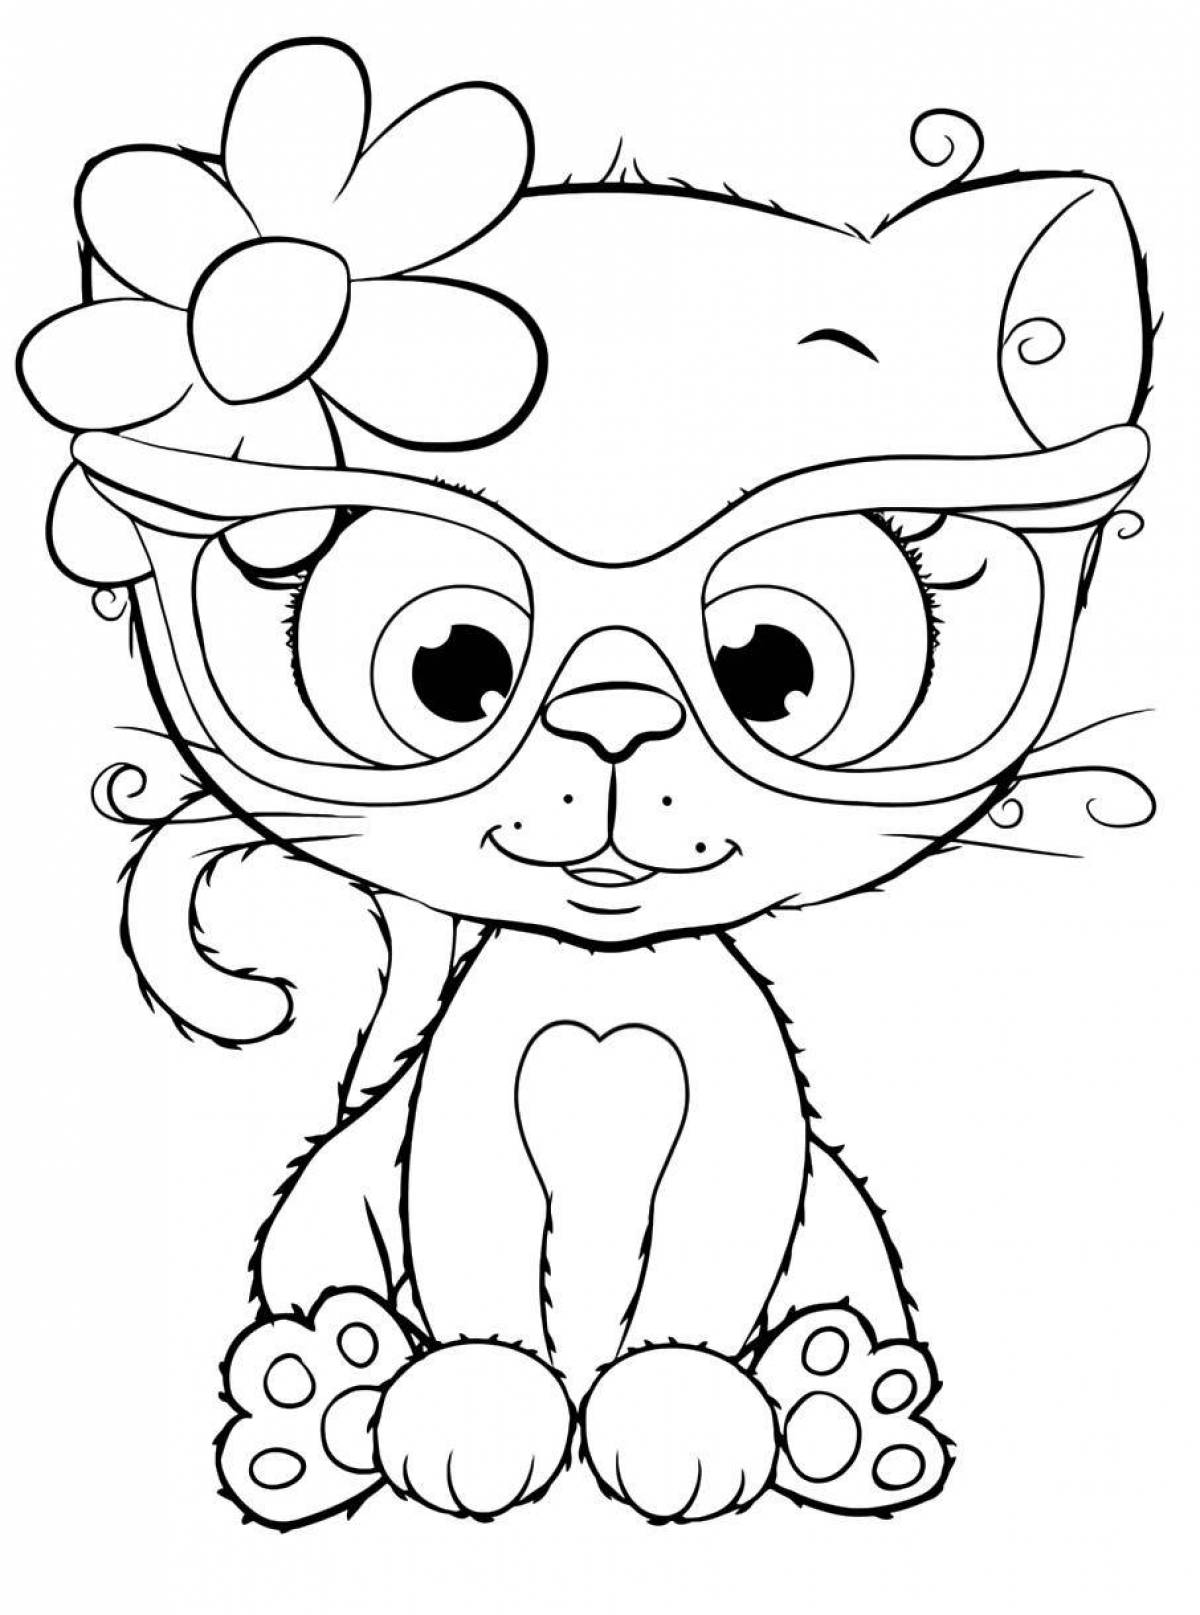 Tiptop coloring pages for girls cute fluffies